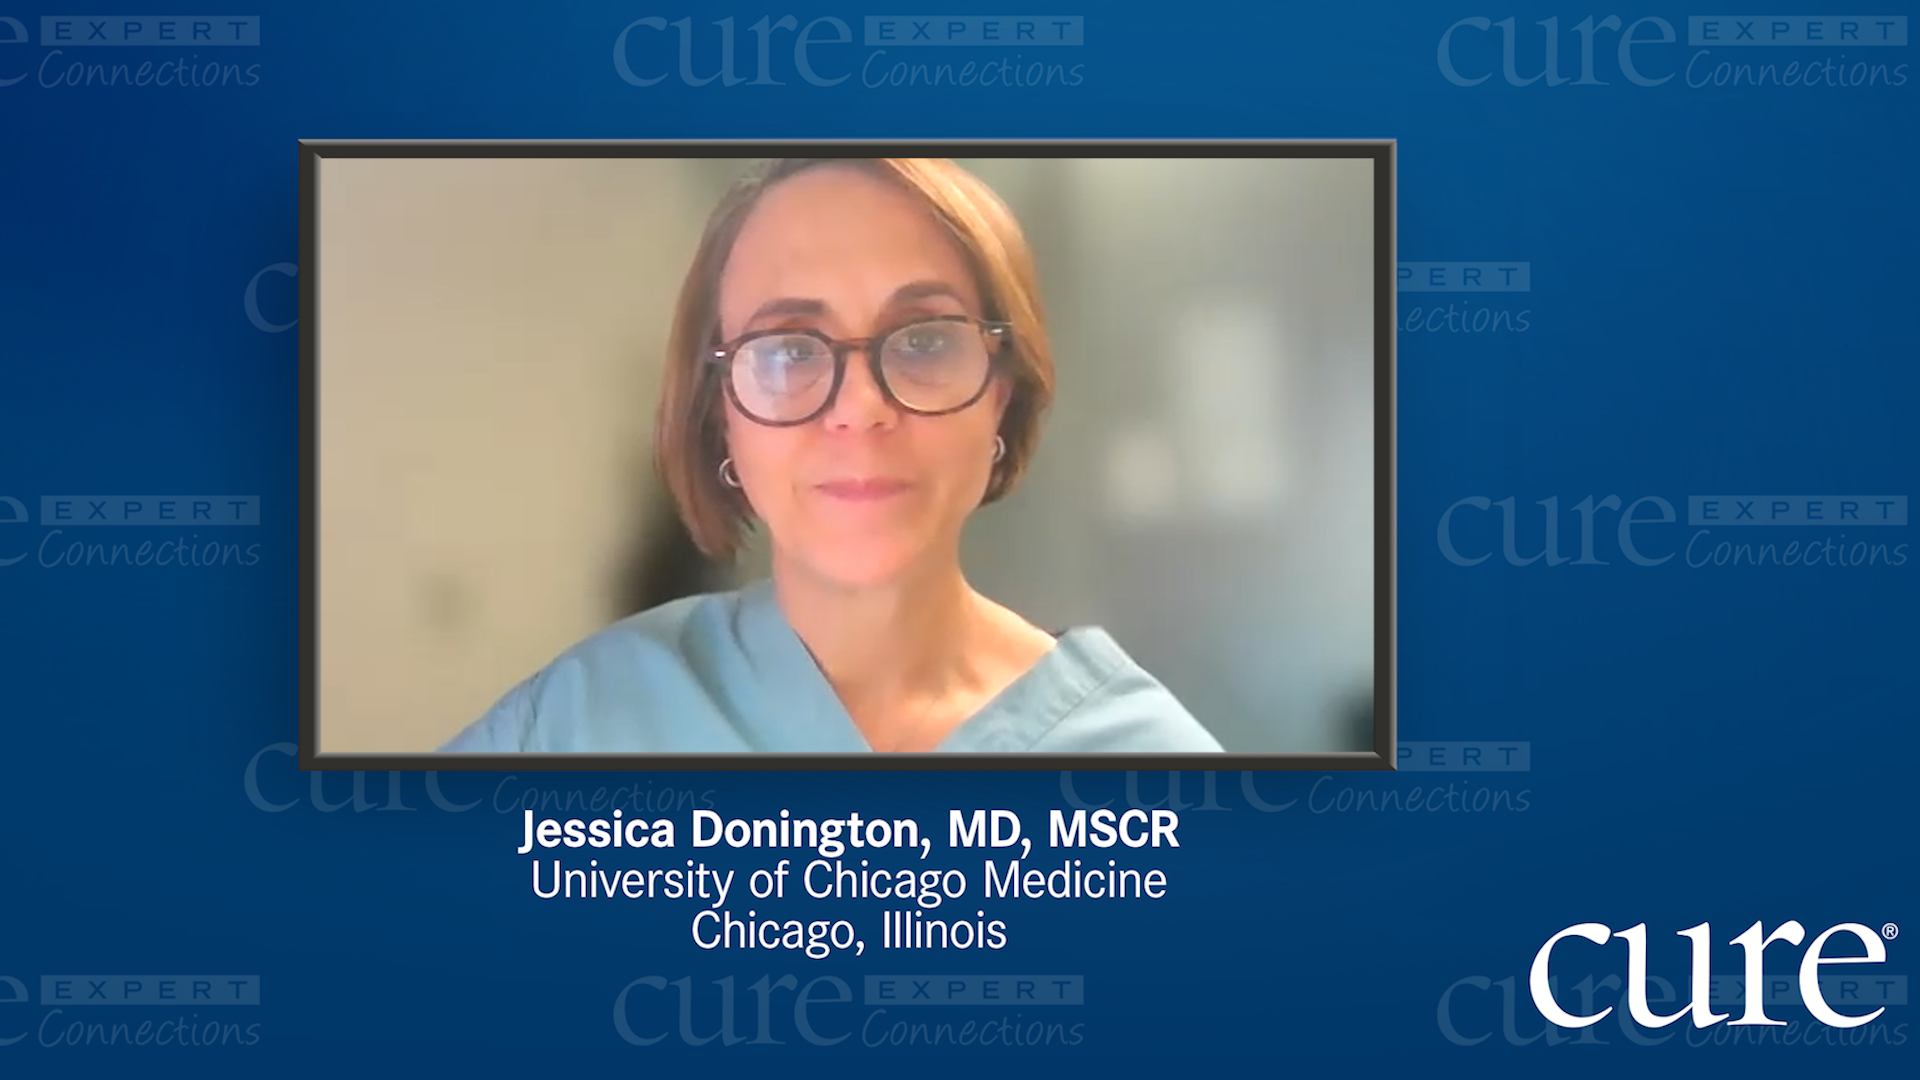 Talking to Early Non-Small Cell Lung Cancer Patients About Adjuvant Therapy